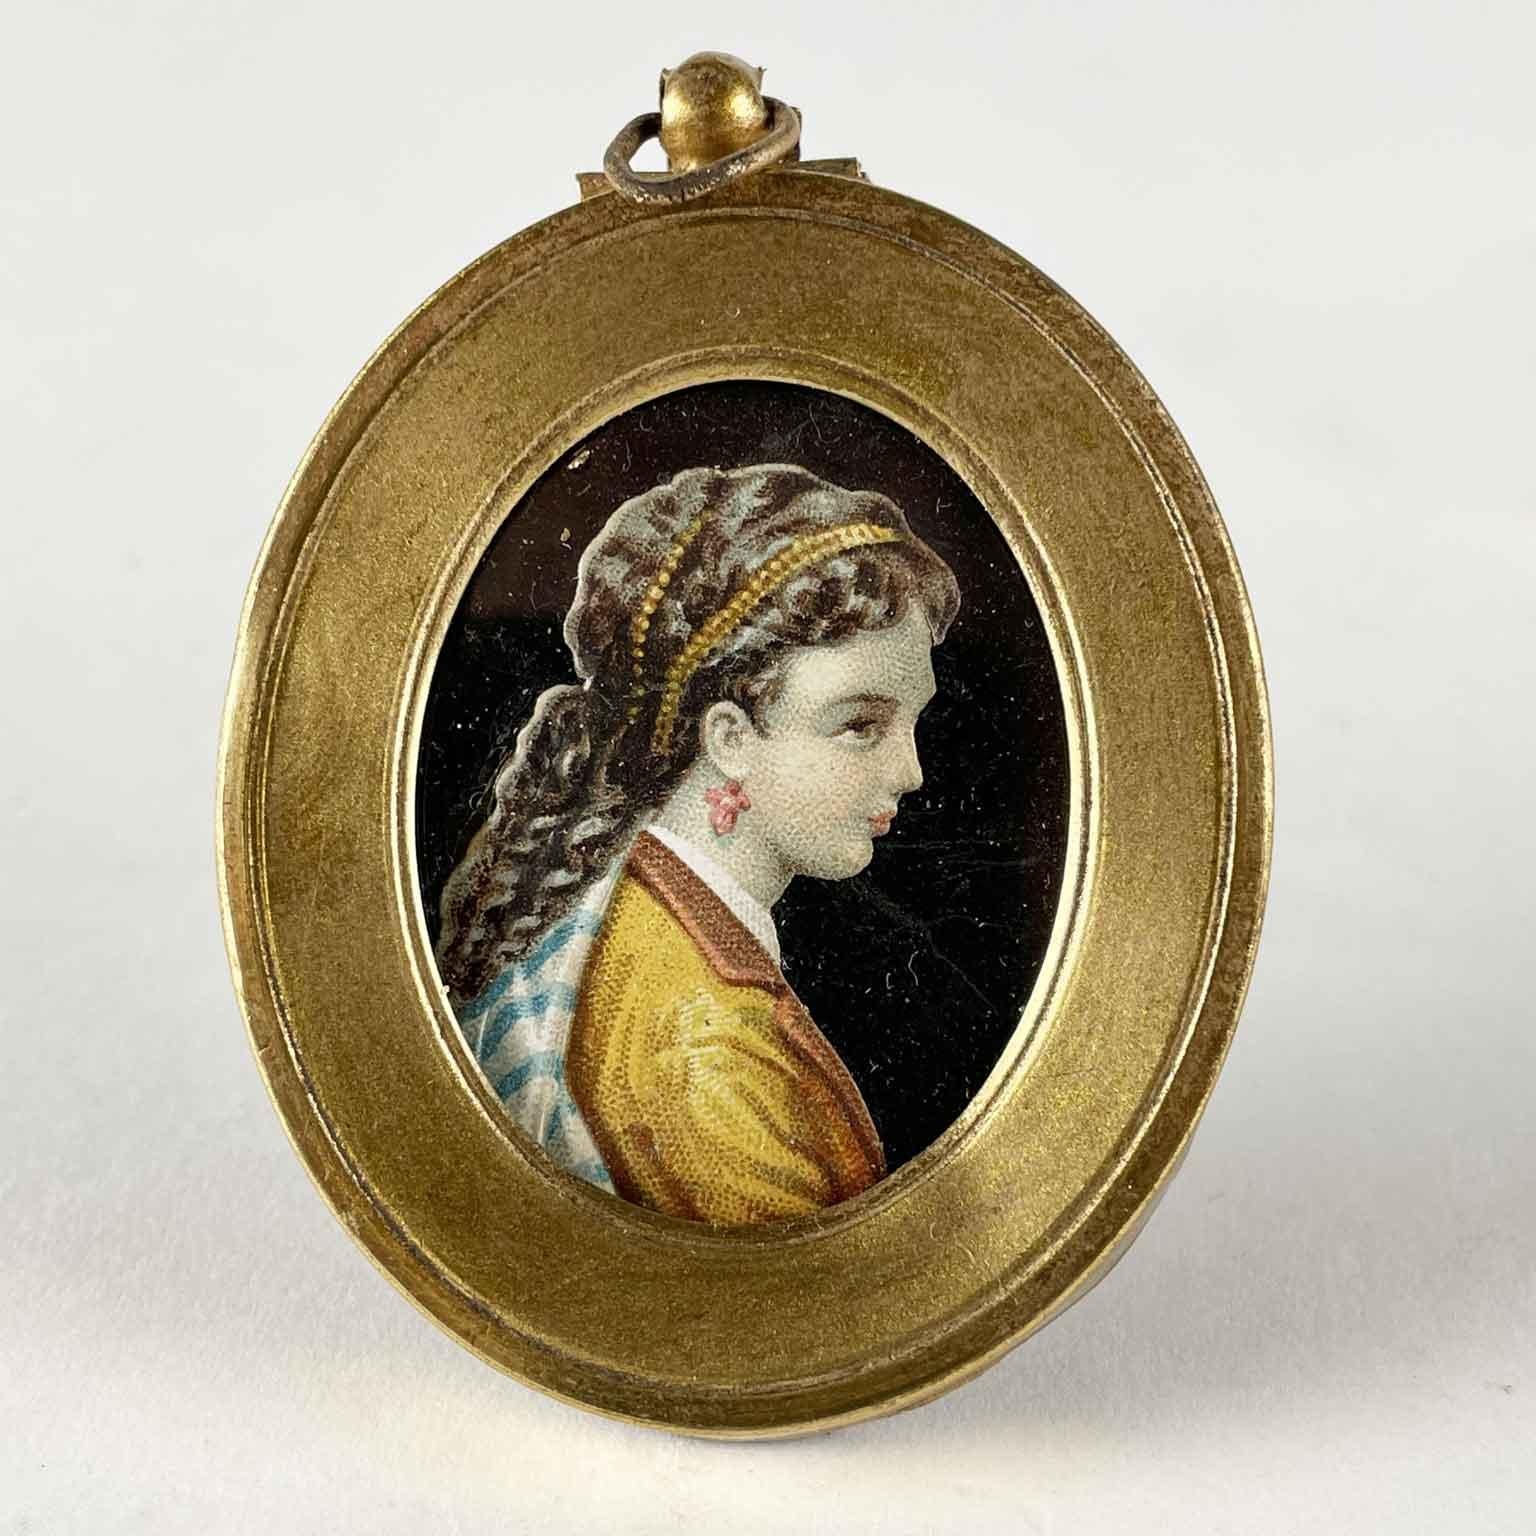 A lovely pair of portrait miniatures of two ladies, by a French skillful artist who painted in fine pointille technique on paper this pair of portraits in the 1870s circa.

Set in two beautiful brass frames, can be hanged or placed on a table.
Good